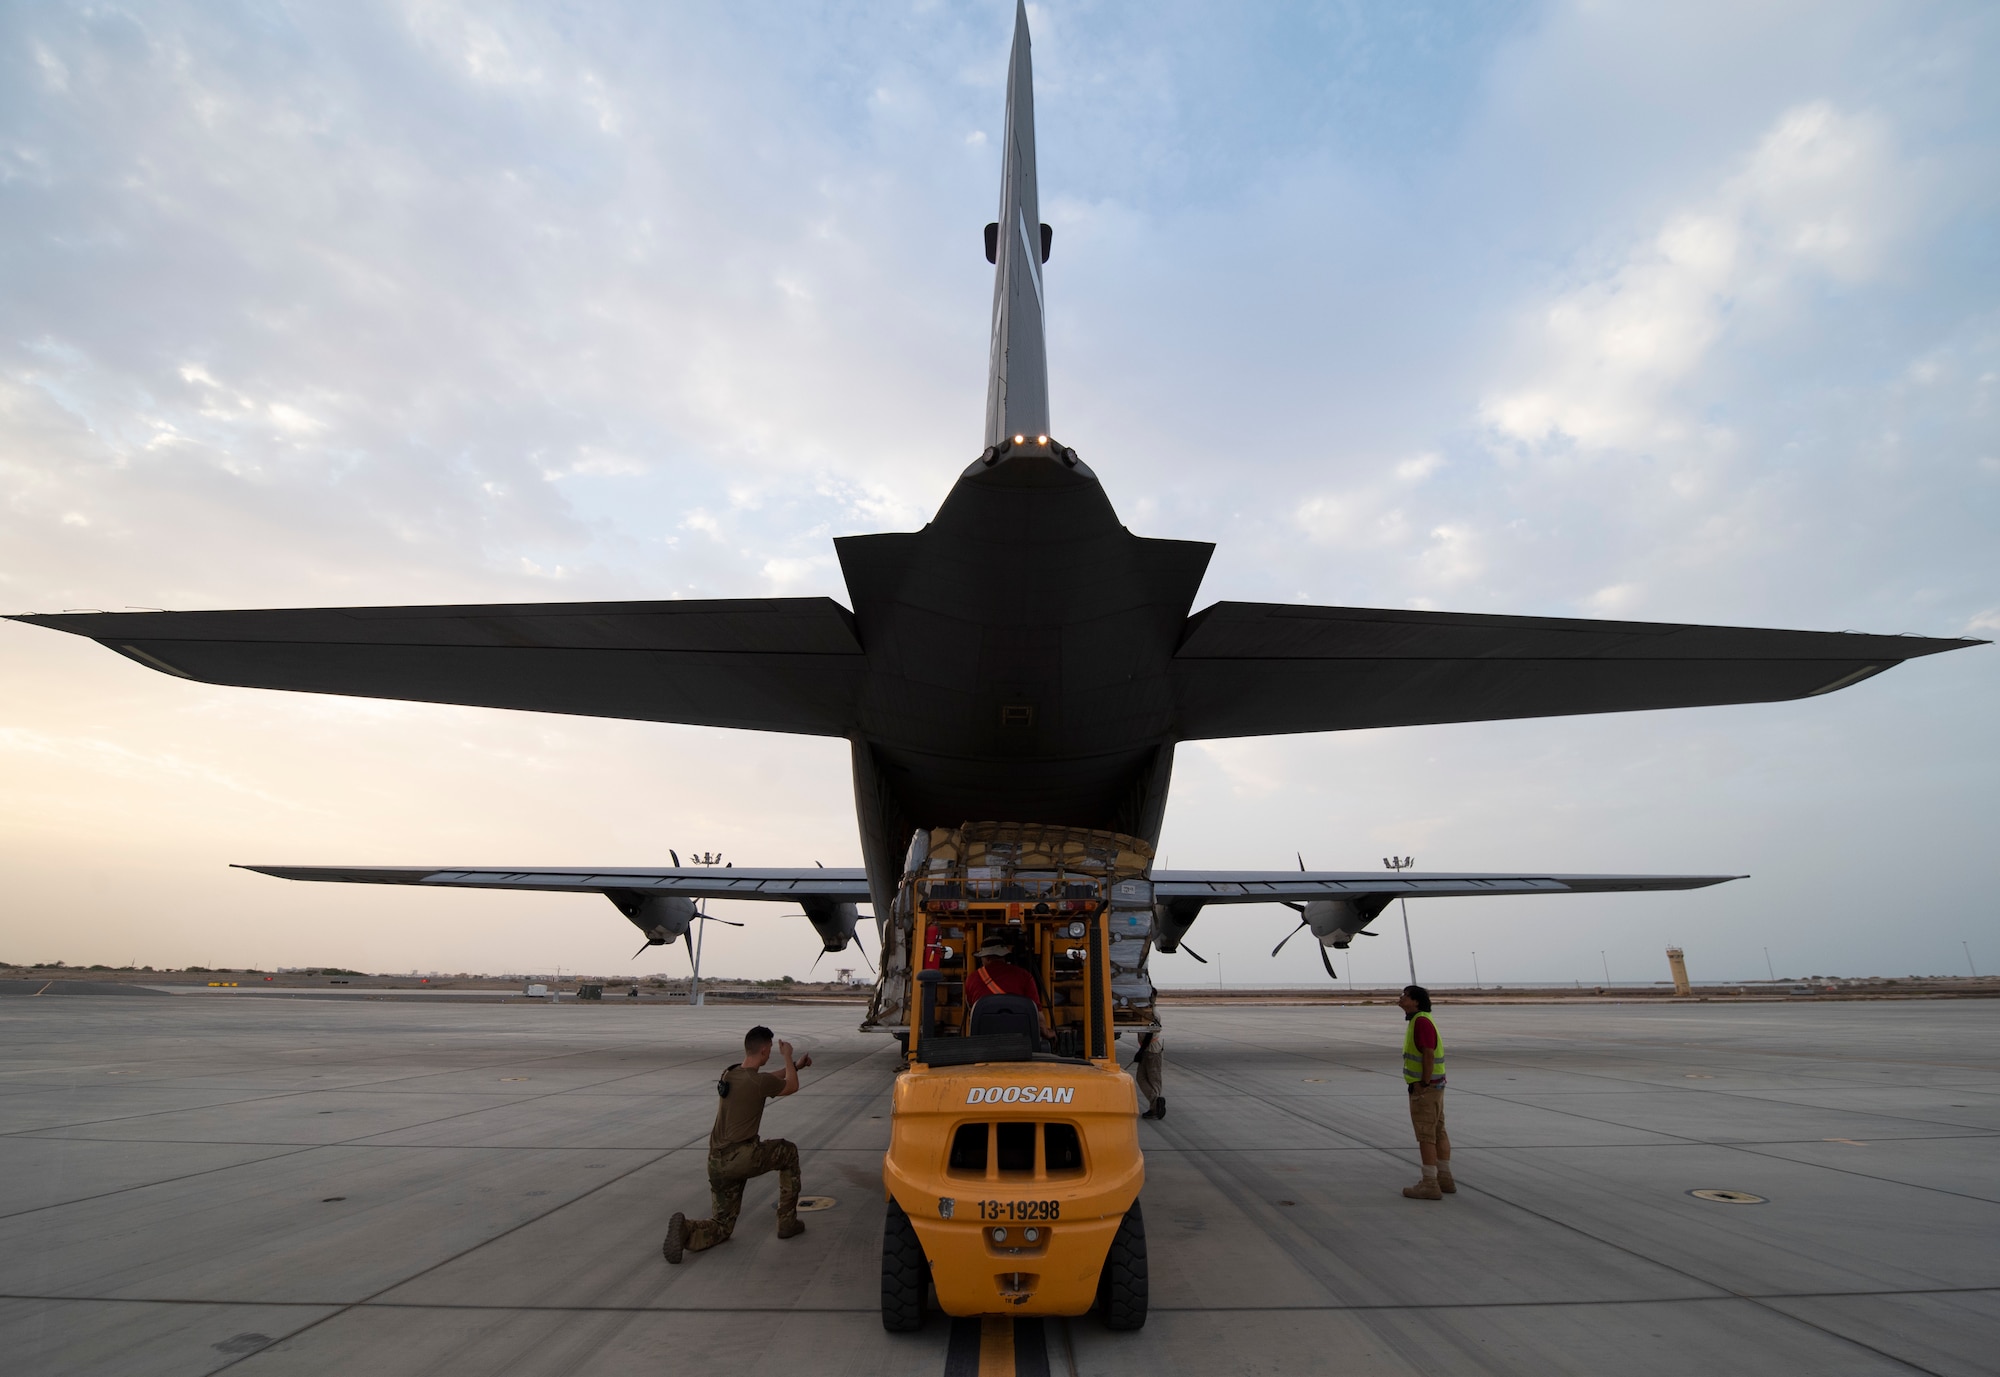 Cargo is loaded onto a U.S. Air Force C-130J Super Hercules assigned to the 75th Expeditionary Airlift Squadron (EAS) at Camp Lemonnier, Djibouti, June 28, 2020. The 75th EAS provides strategic airlift capabilities across the Combined Joint Task Force - Horn of Africa (CJTF-HOA) area of responsibility. (U.S. Air Force photo by Tech. Sgt. Christopher Ruano)